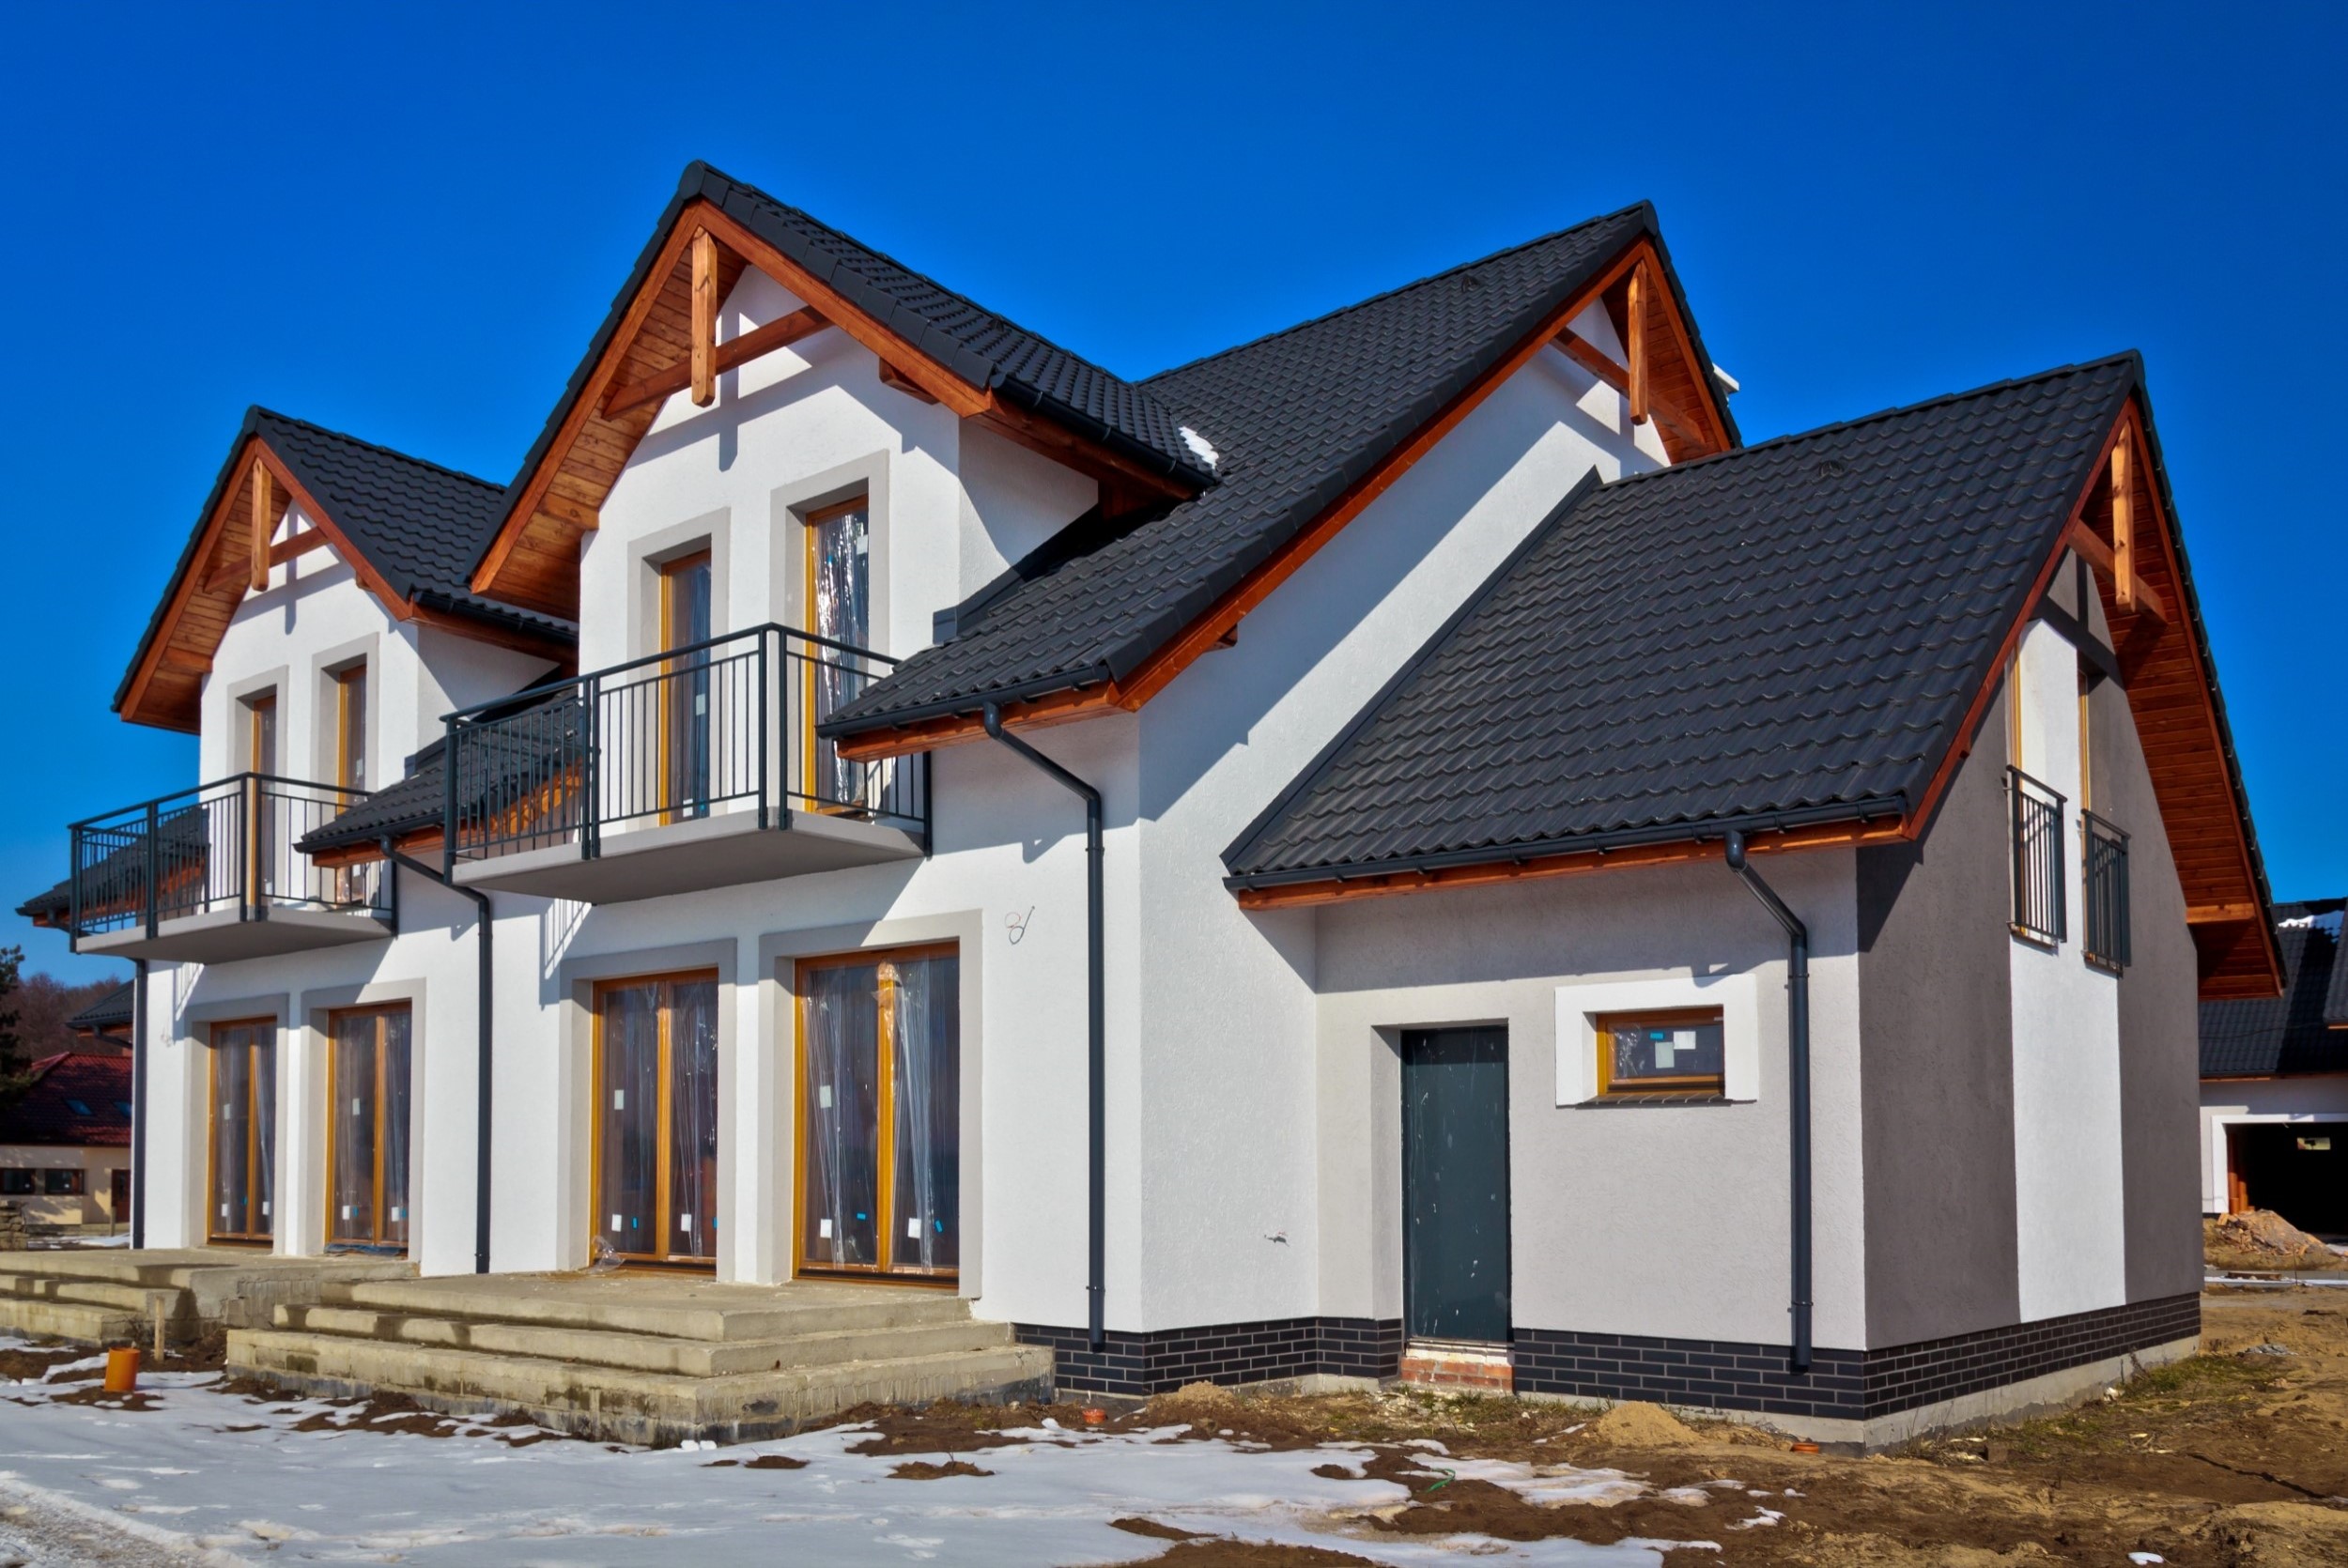 The 5 Benefits of Winter Construction Projects: Why Now is the Perfect Time